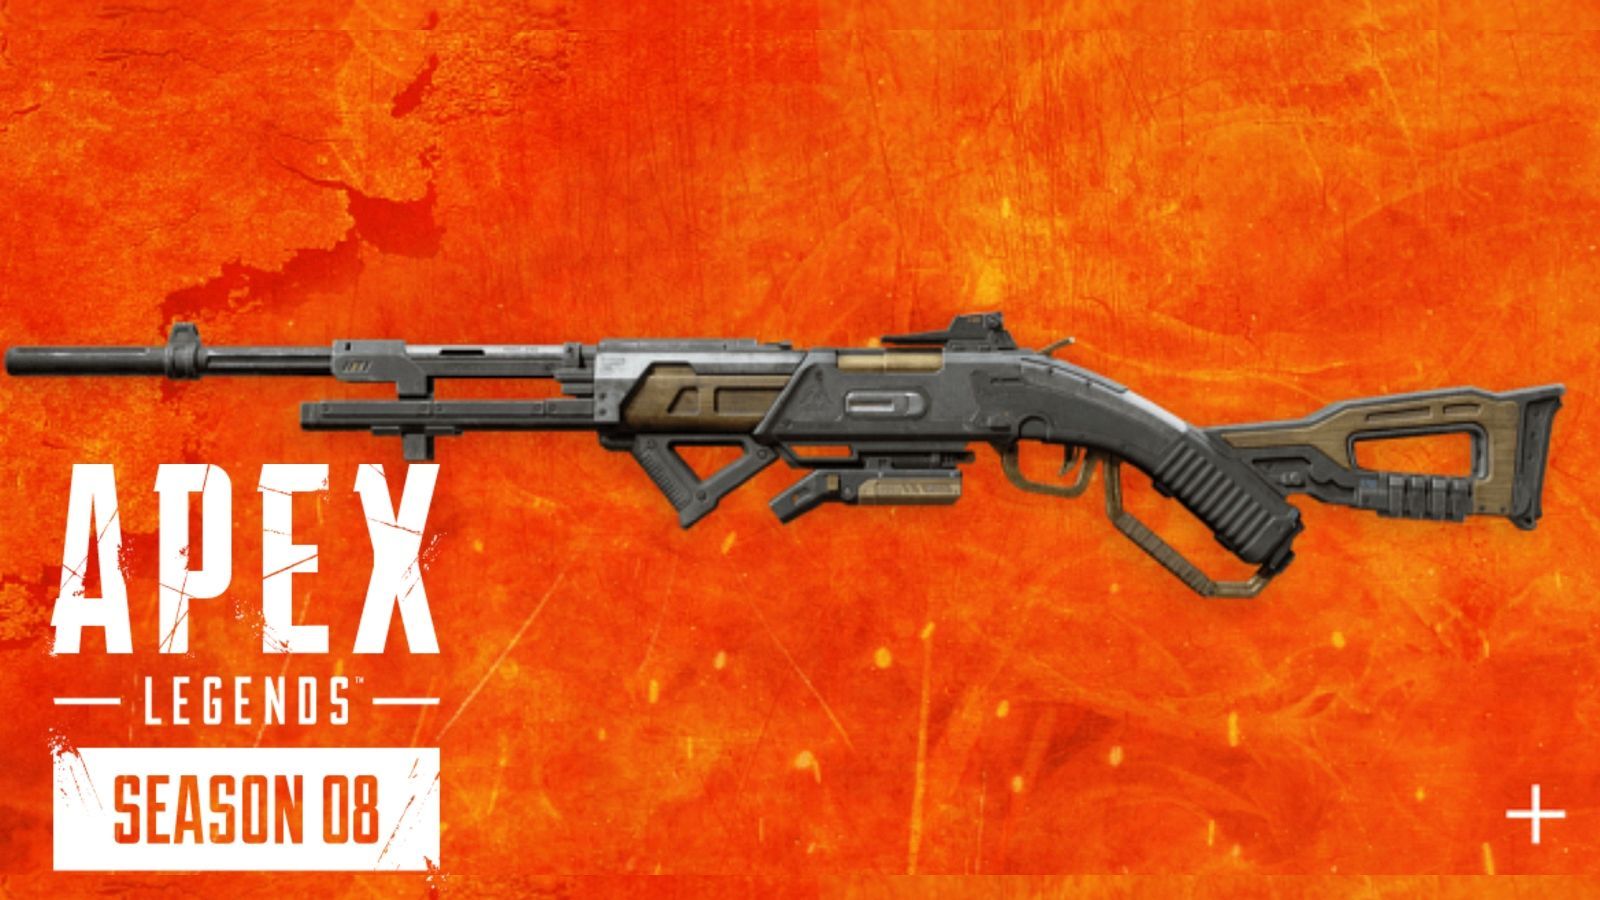 Apex Legends 30 30 Repeater: New Season 8 Weapon Ammo Type, Attachments, Damage